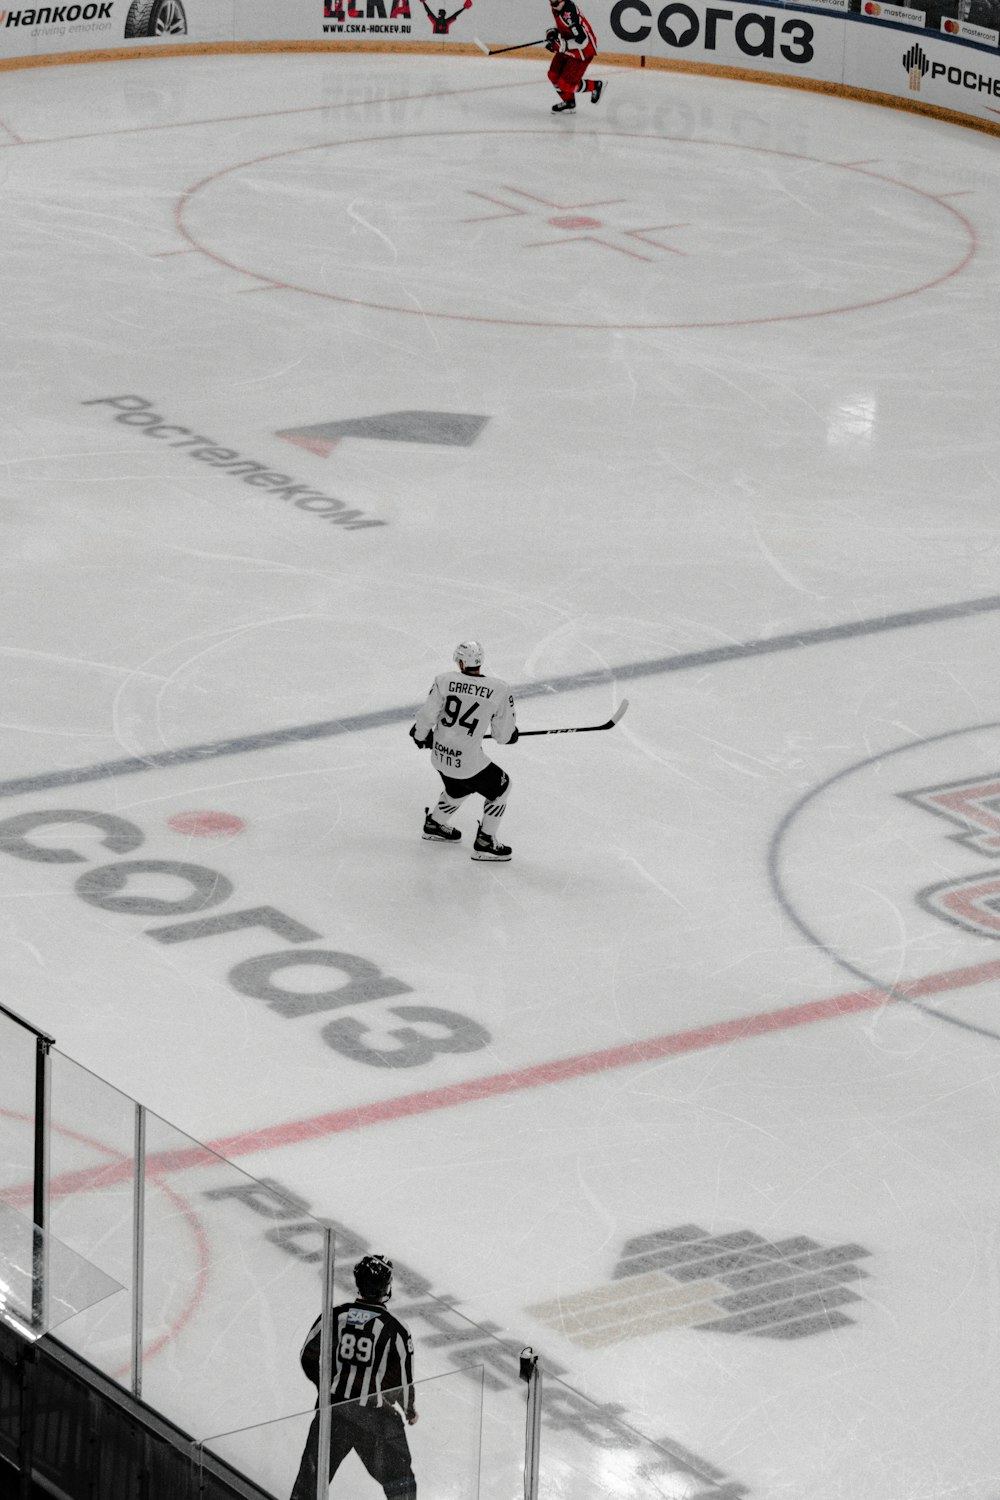 man in black and white ice hockey jersey riding on hockey board